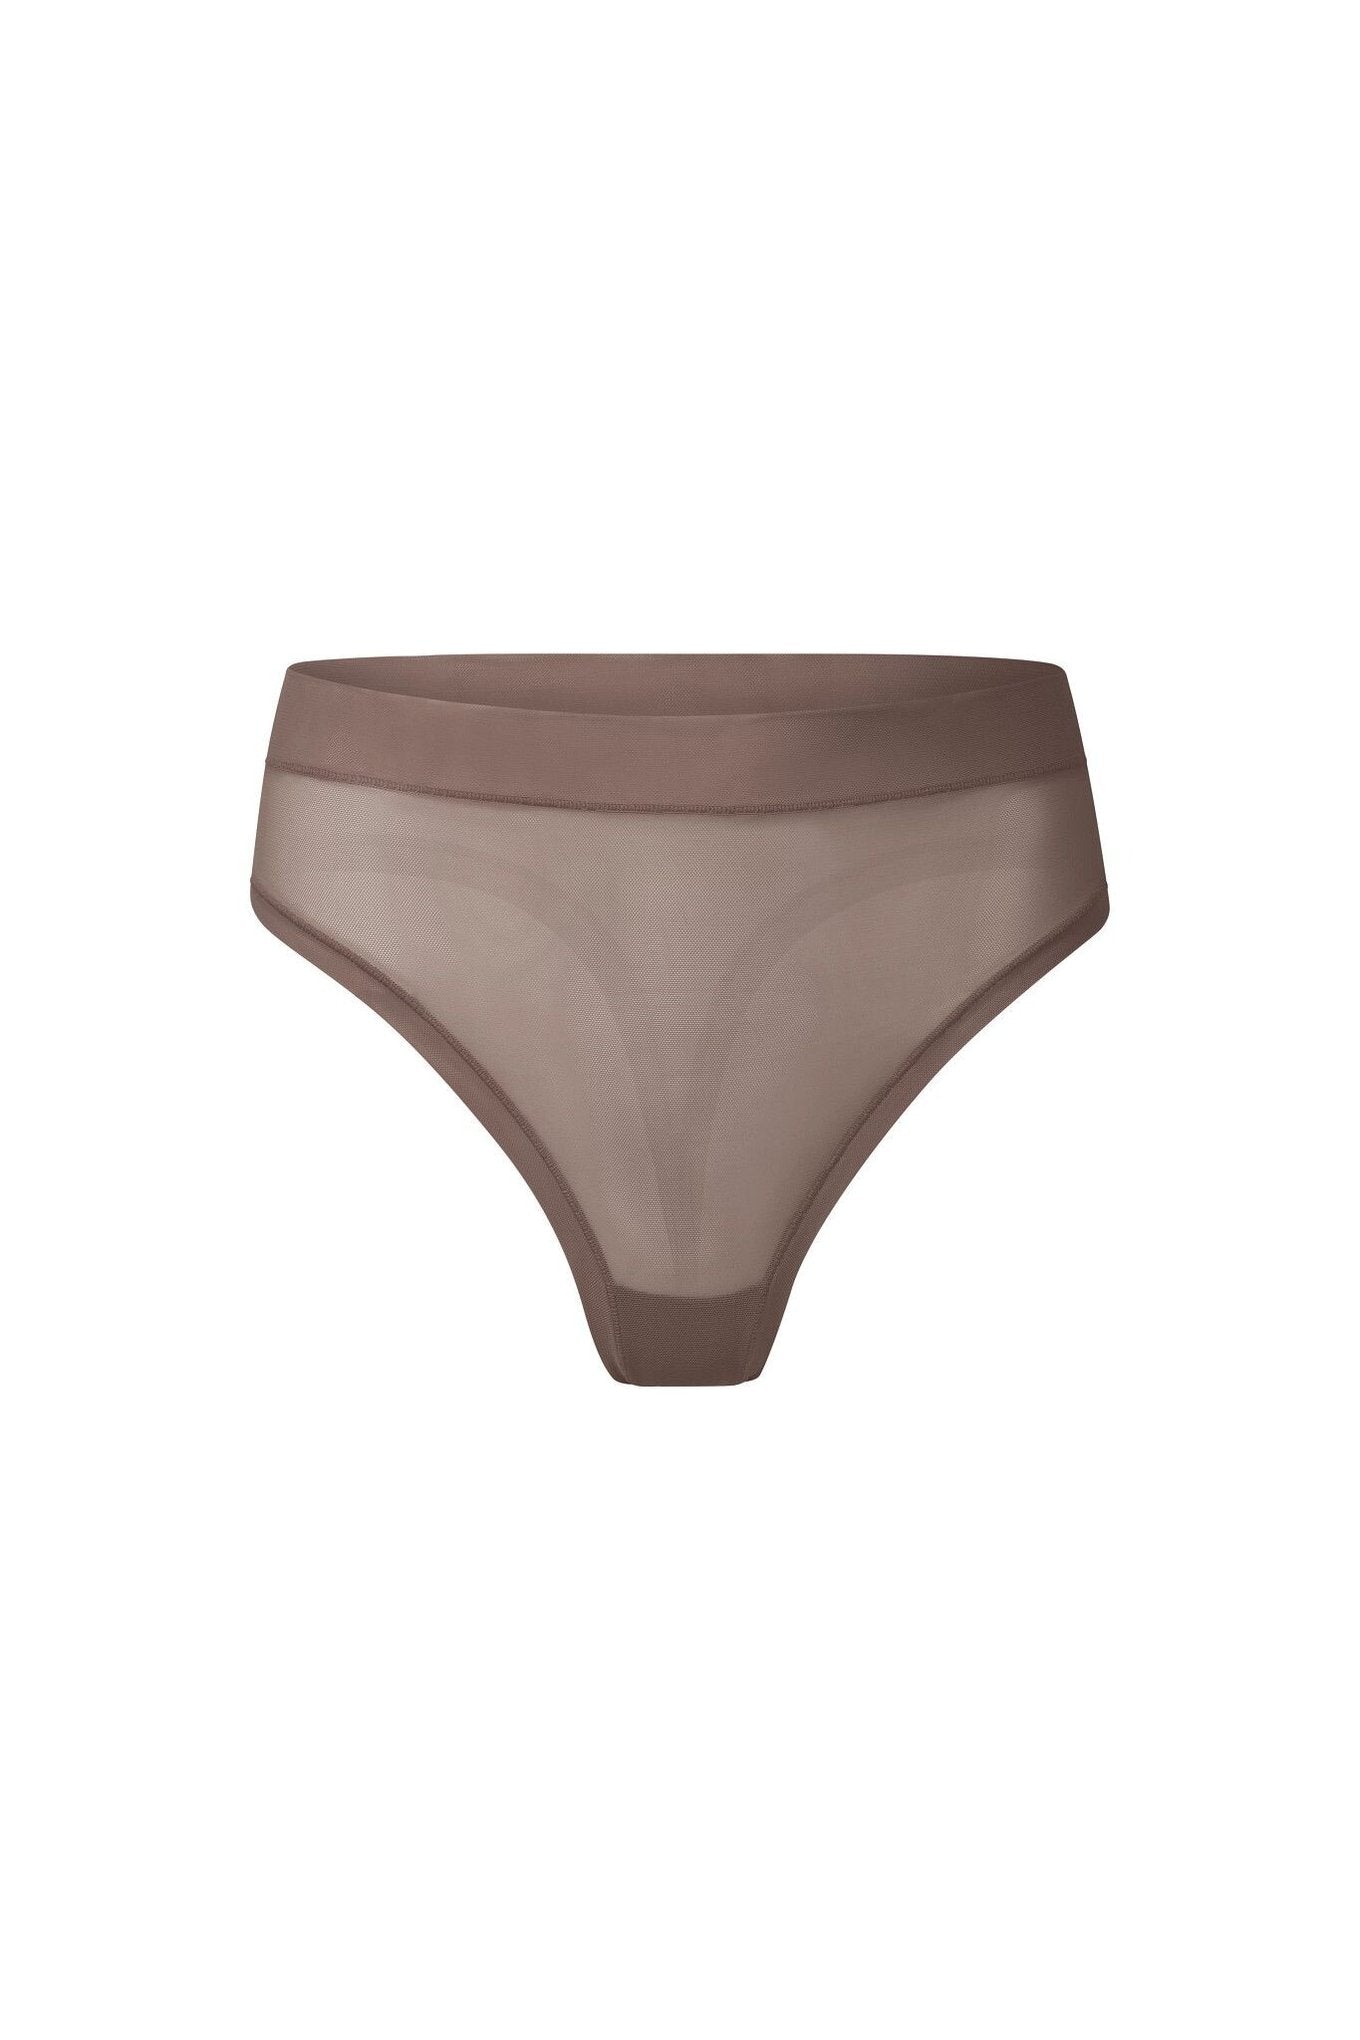 nueskin Carey Mesh Mid-Rise Thong in color Deep Taupe and shape thong